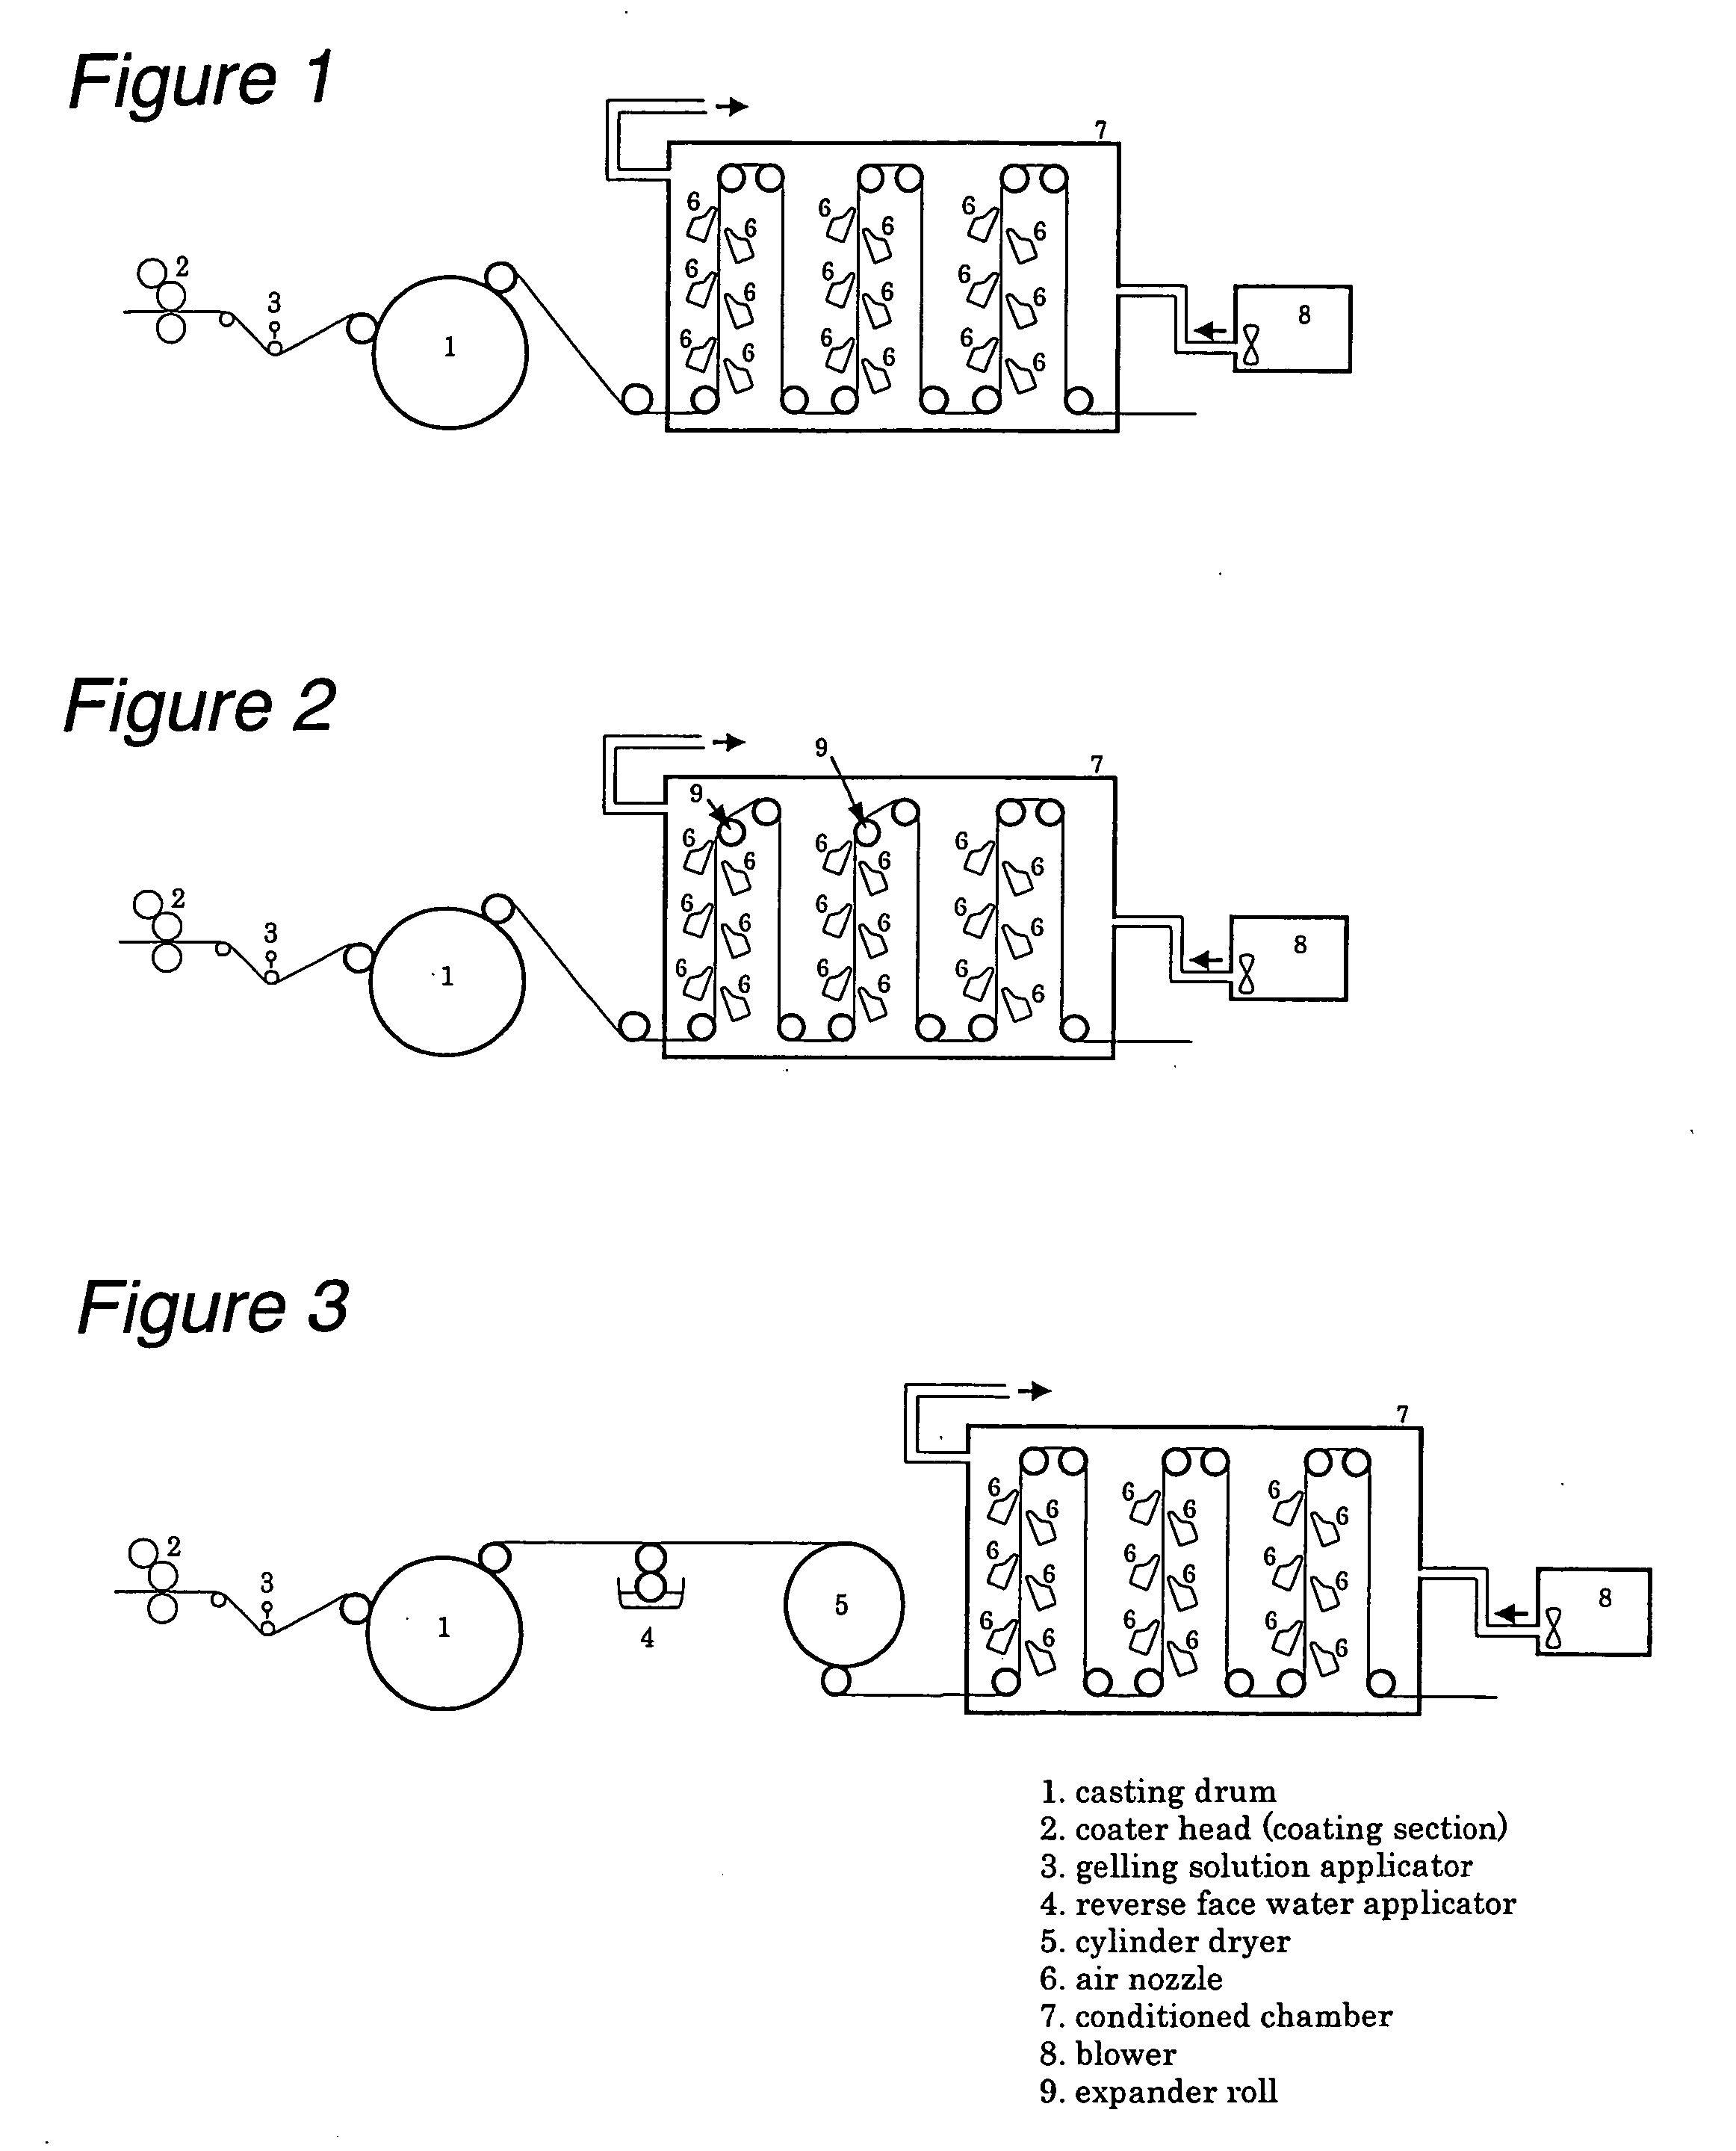 Processes for producing cast coated papers and apparatus therefor